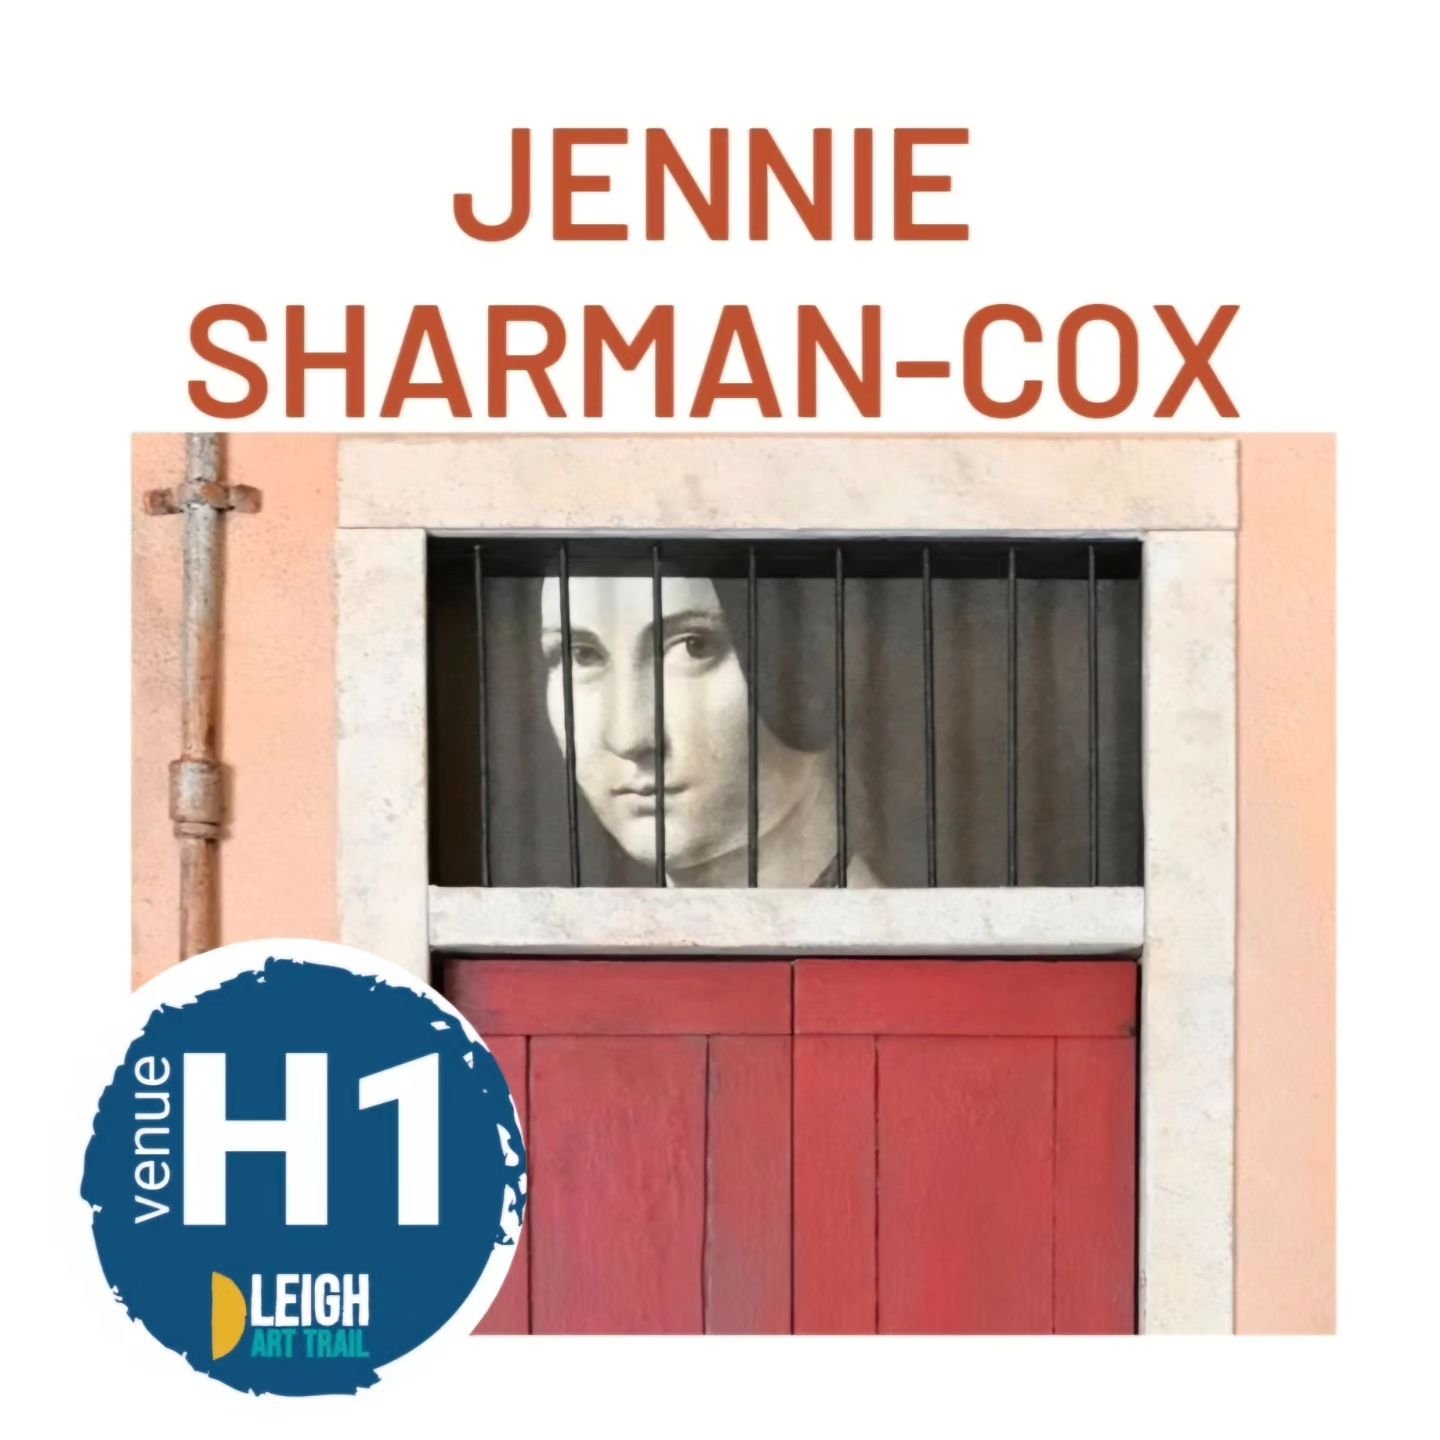 We're sooooo excited to present the first of our home venue artists -  Jennie Sharman-Cox @jenniesharmancox
.
All our home venues cordially invite you to see their artwork &amp; workspaces at their place of residence! Swipe to pic10 for the map &amp;